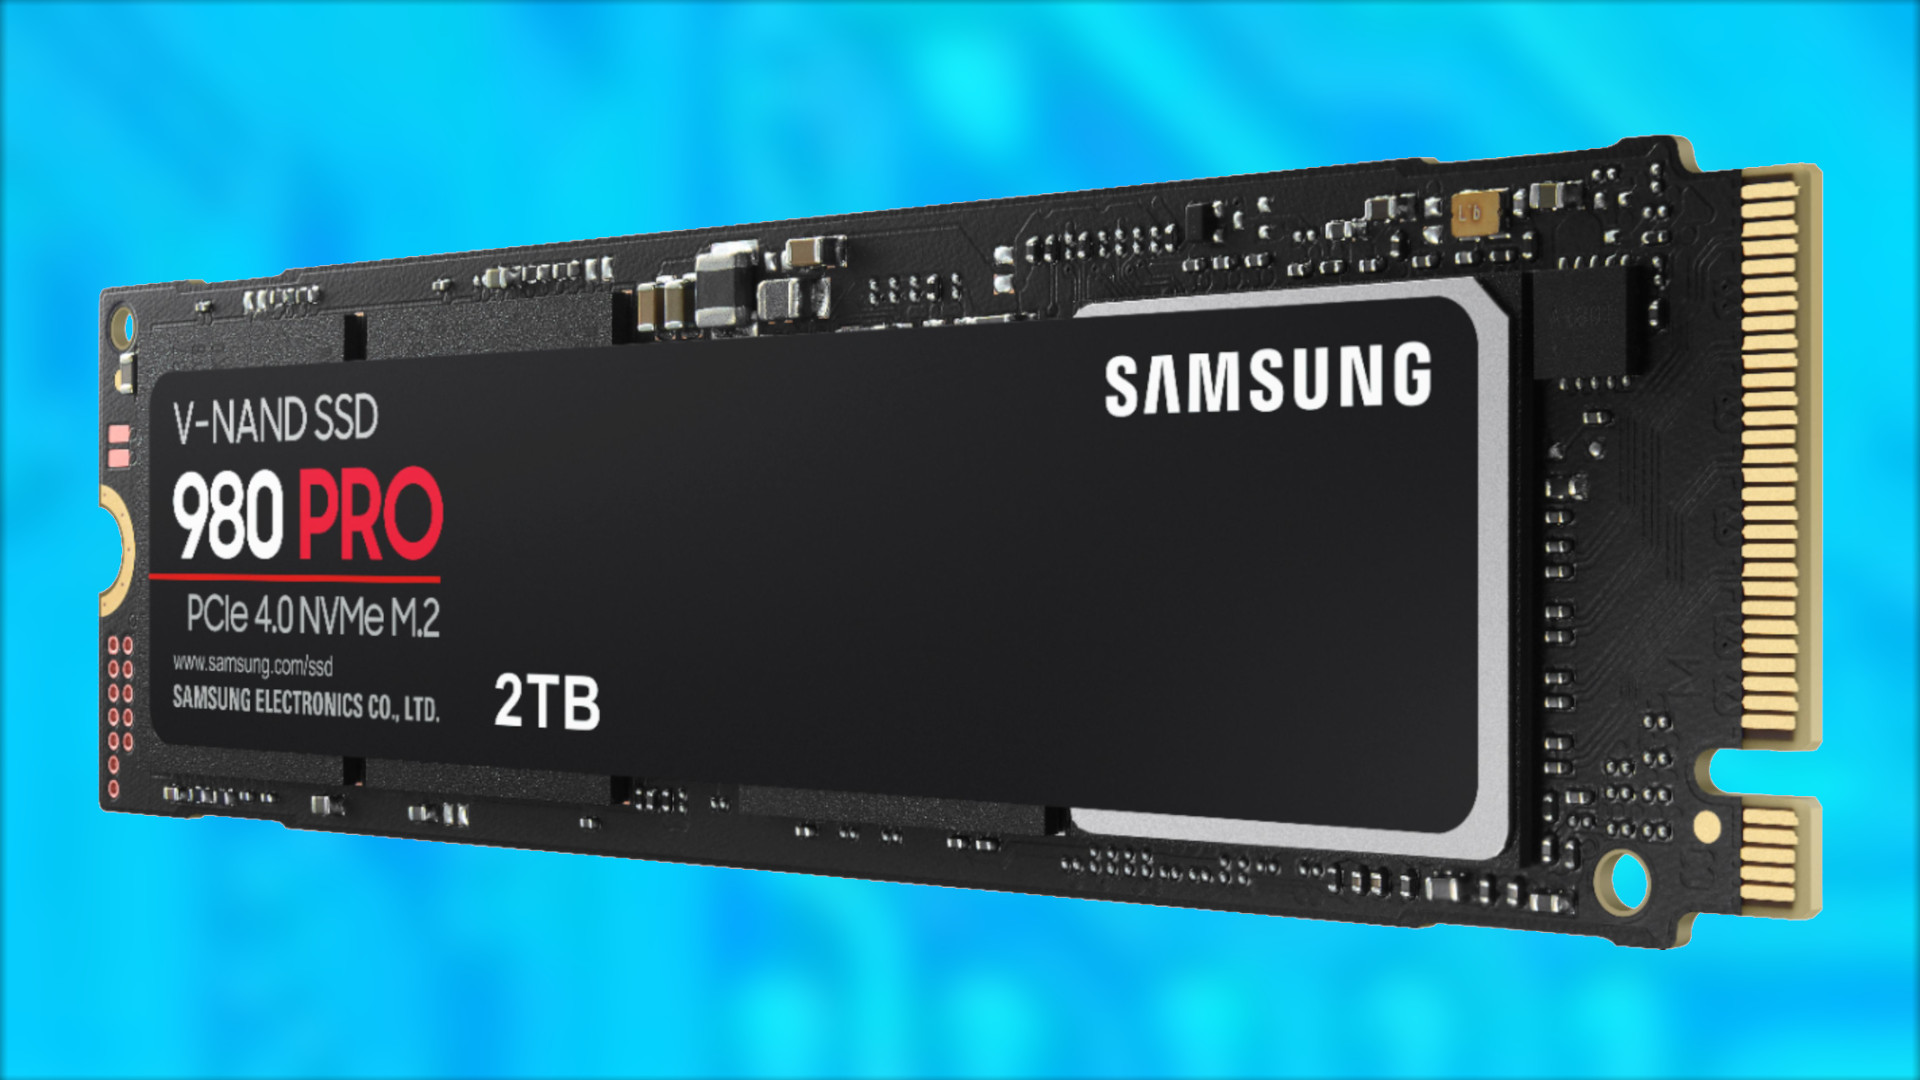 Black Friday SSD Deal: Samsung 980 Pro 2TB SSD for PS5 for $179.99 or Less  - IGN